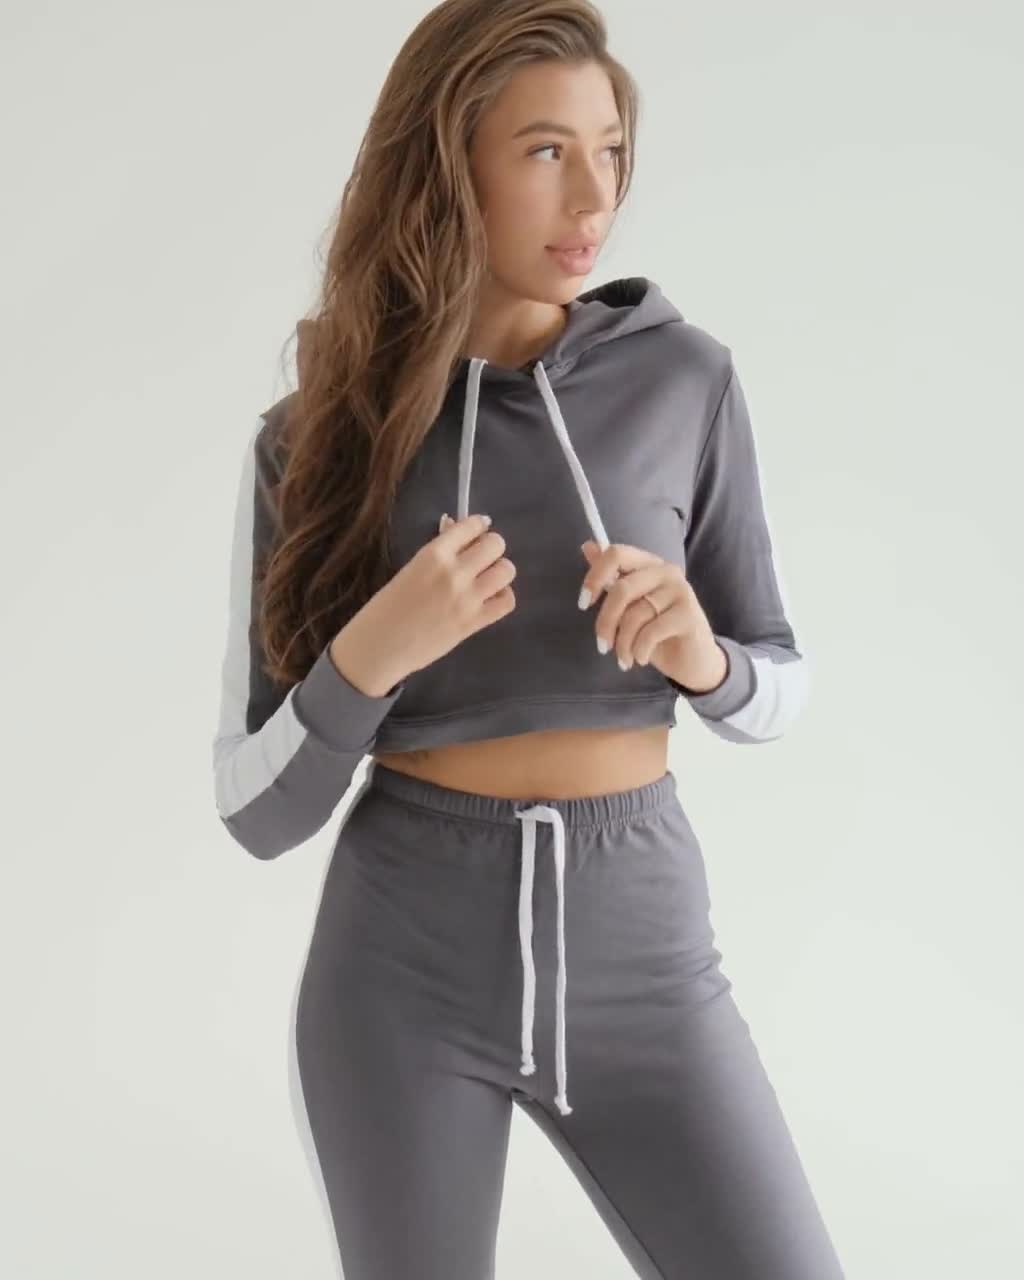 Pink Sports Set, Women Winter Set, Hooded Pullover and Joggers